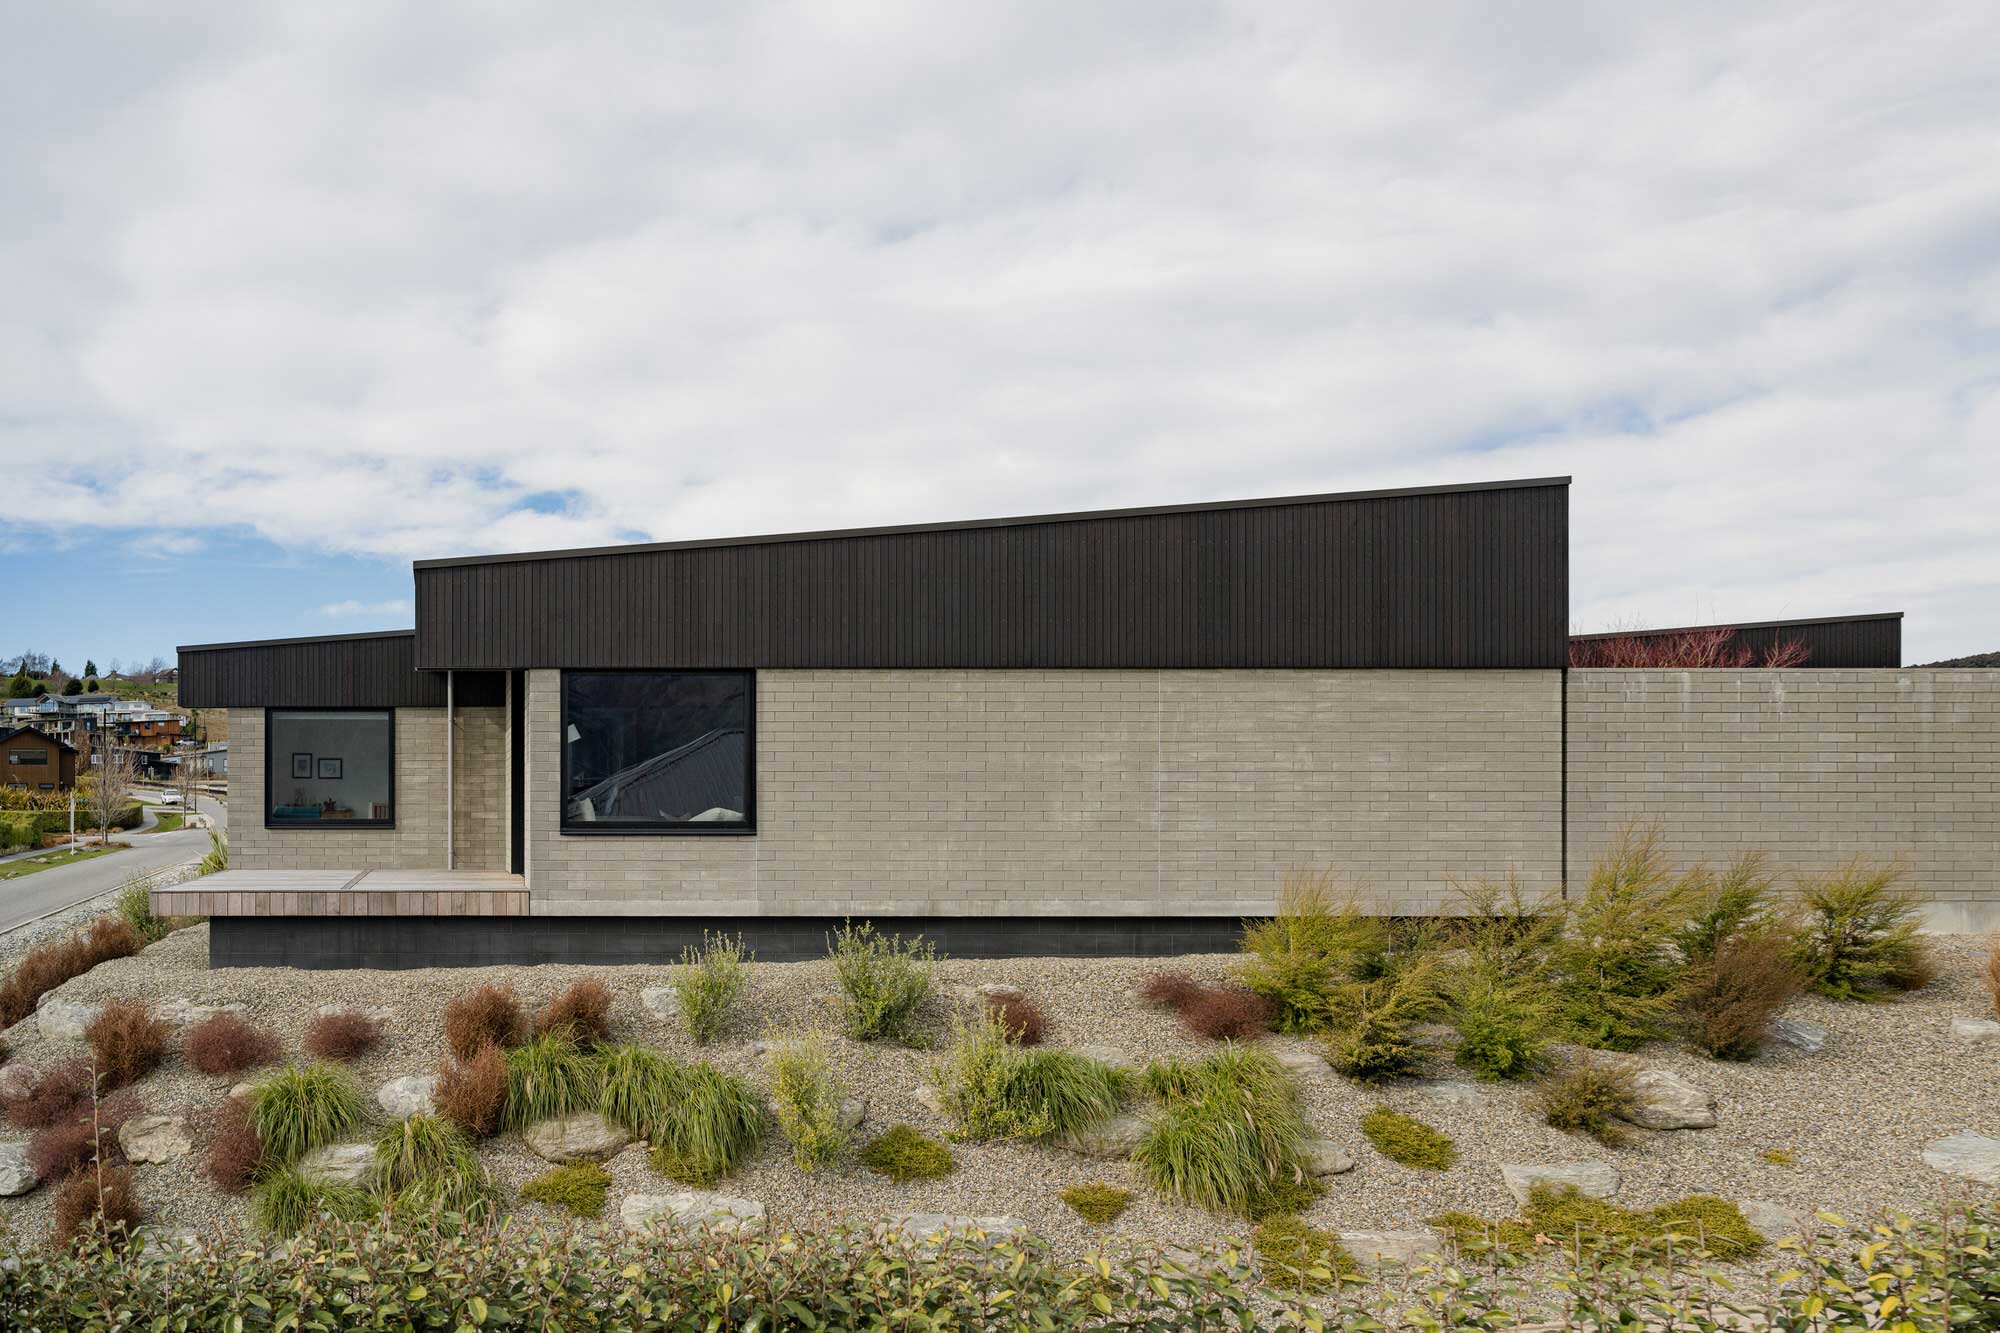 Rafe Maclean 
Architects Owens House